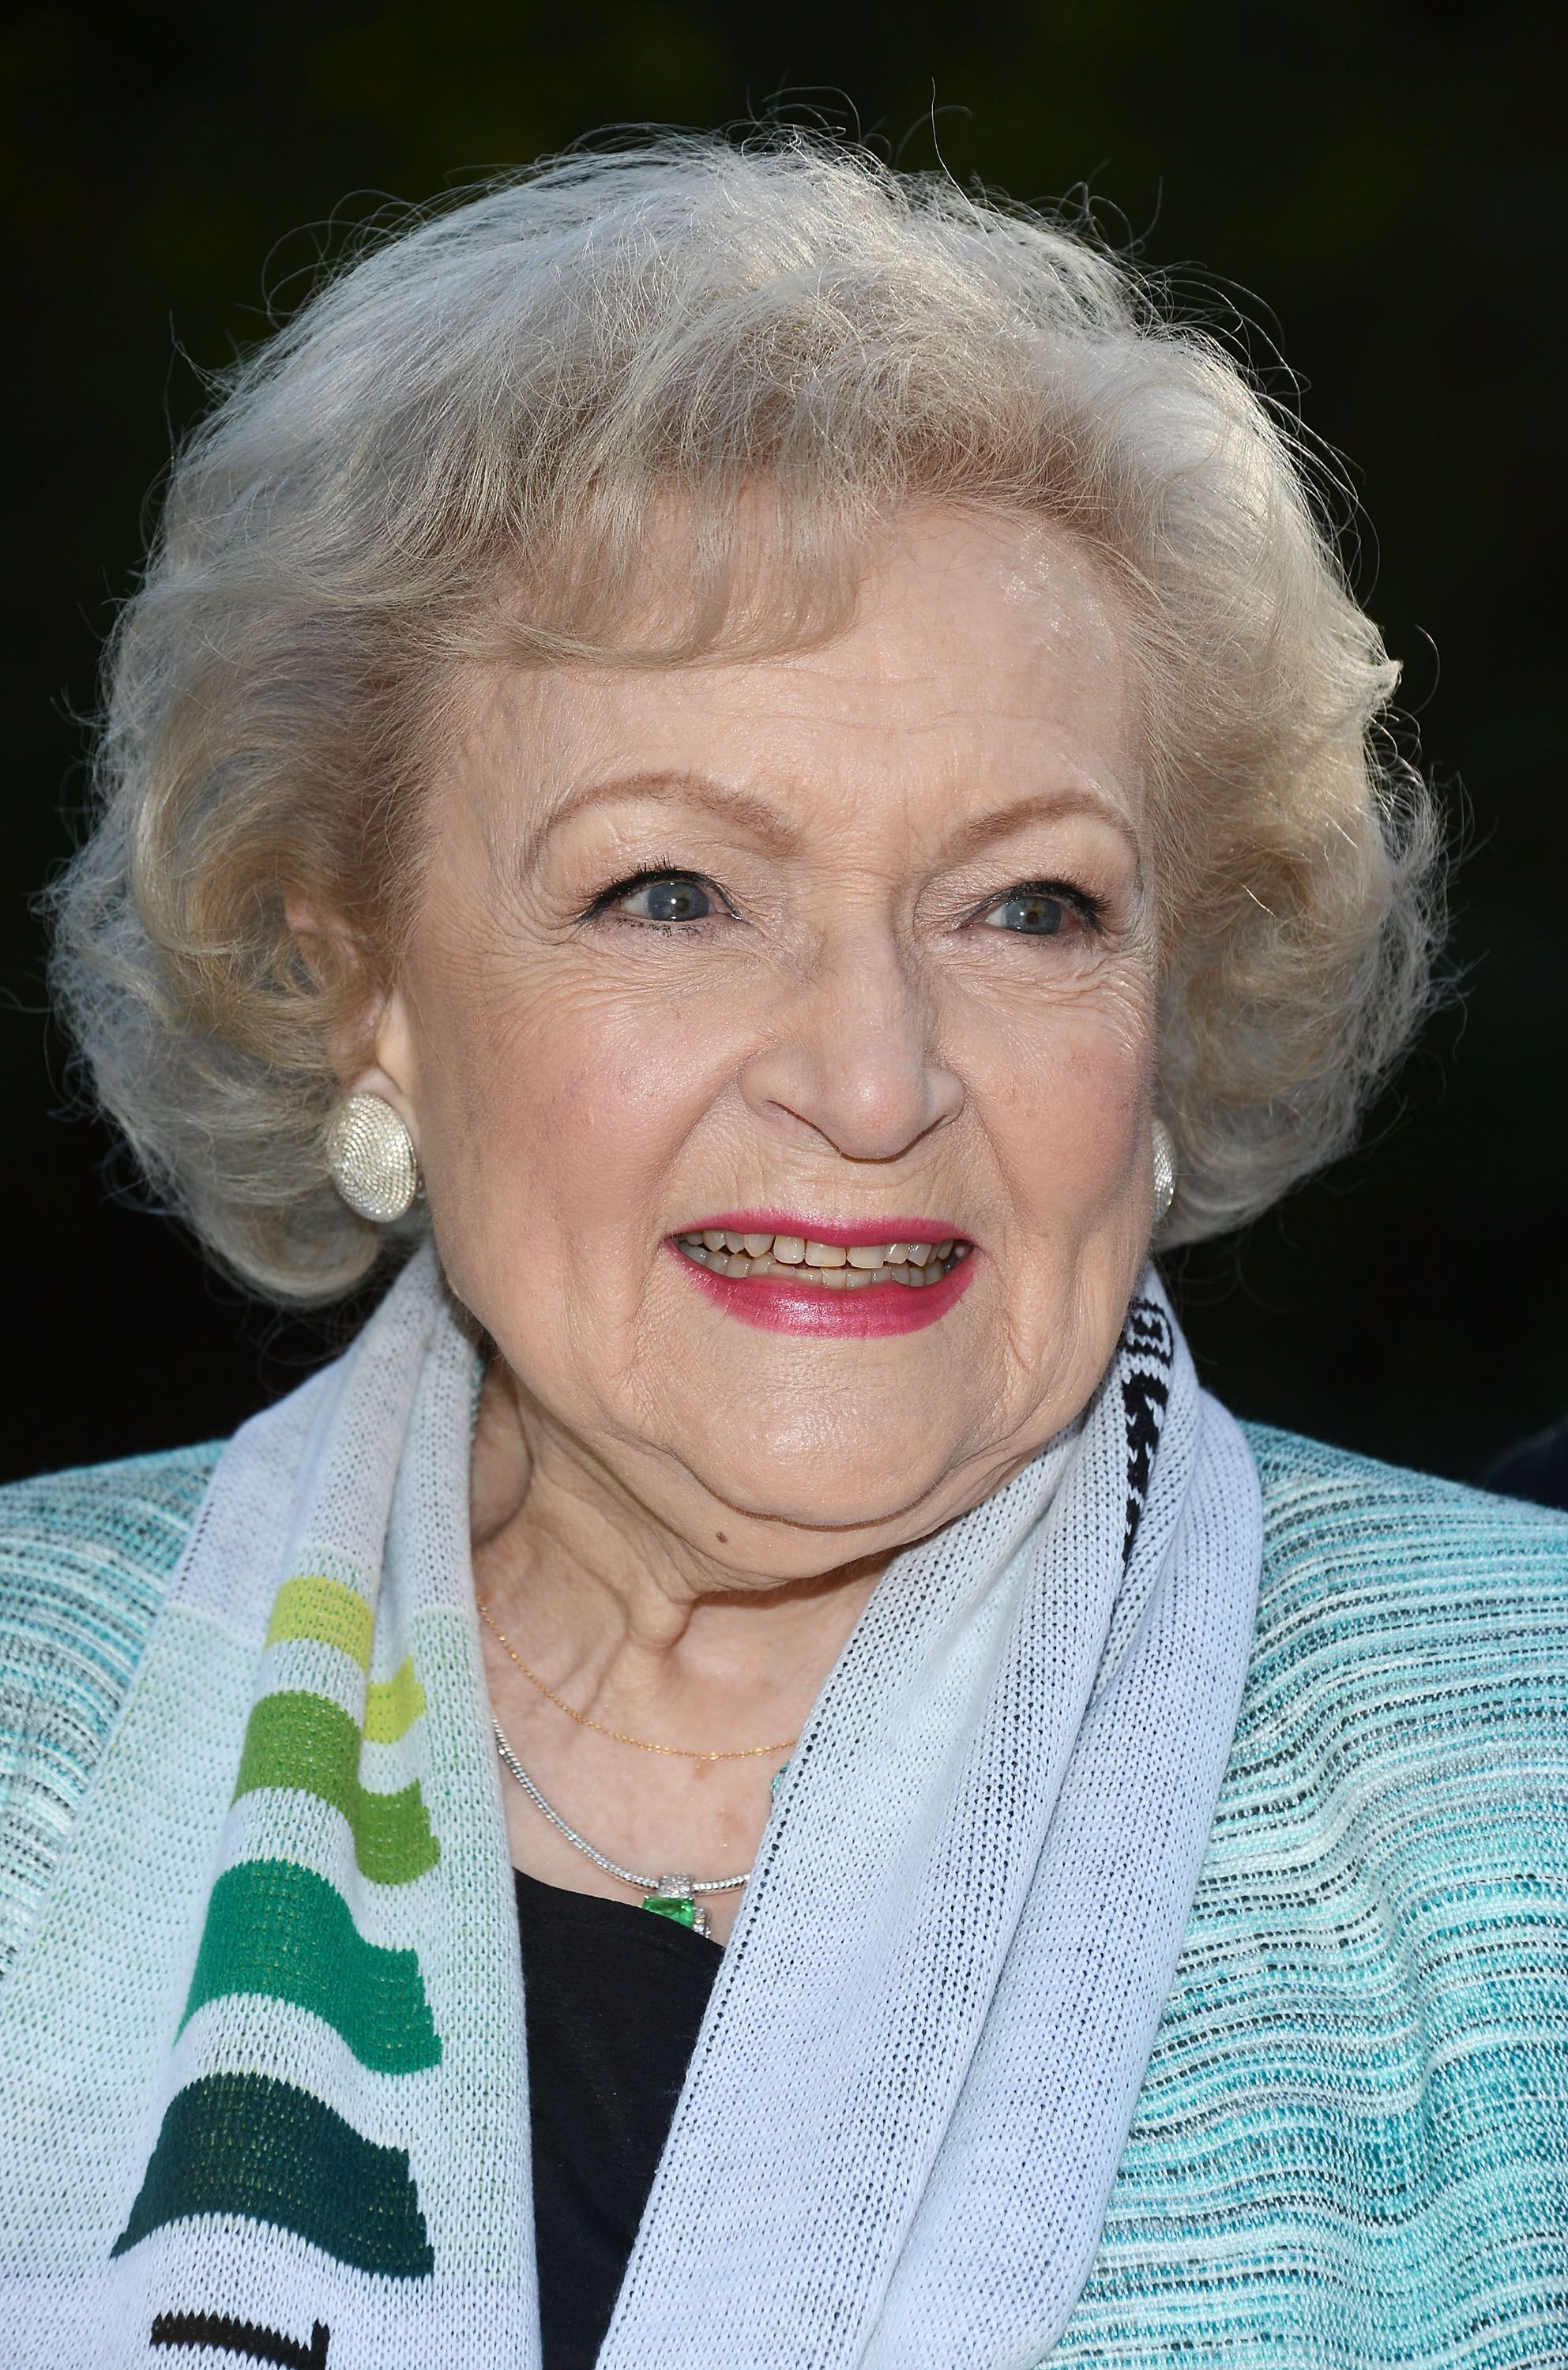 The Lifeline Program spokesperson Betty White hosts the "White Hot" Holiday Event at The Los Angeles Zoo on December 11, 2012 in Los Angeles, California | Photo: Getty Images